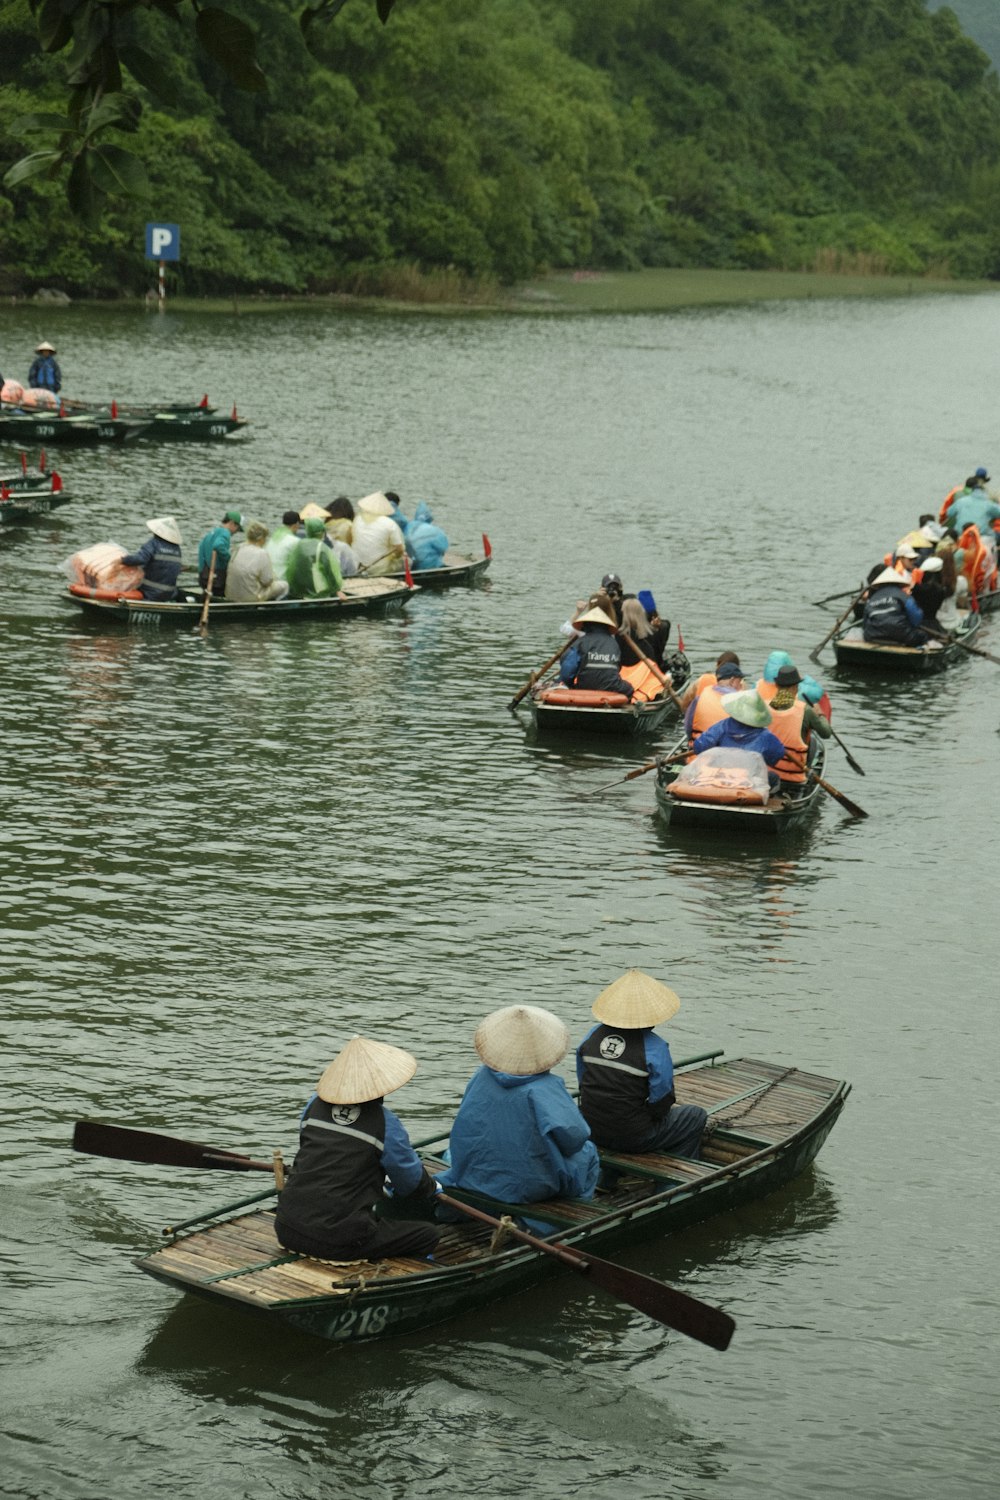 a group of people riding on top of small boats